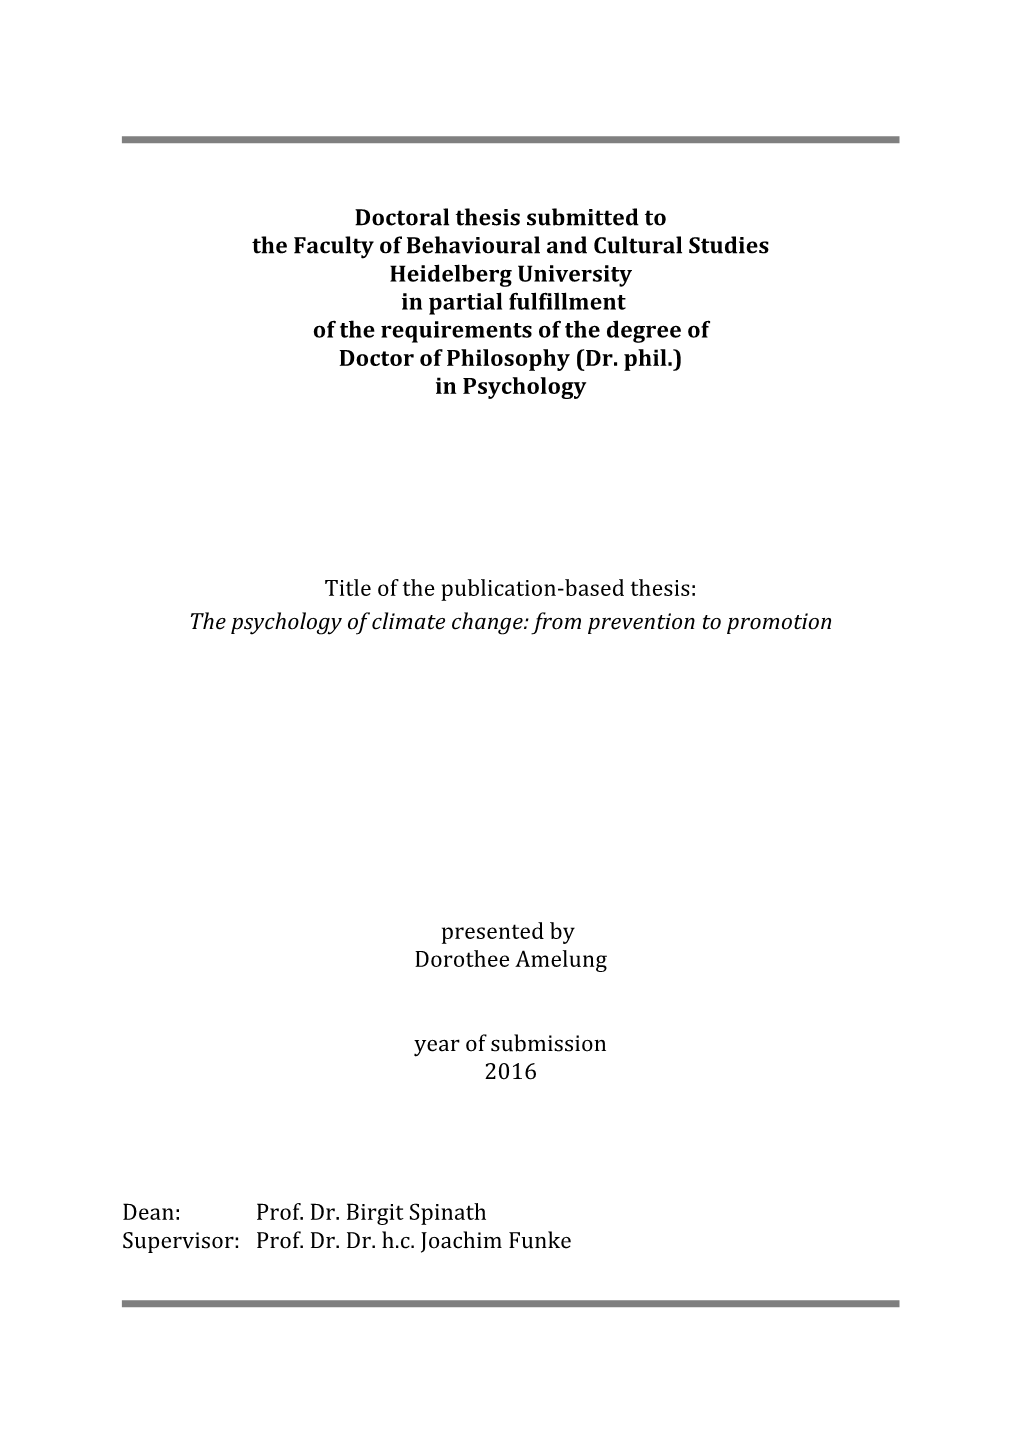 Doctoral Thesis Submitted to the Faculty of Behavioural and Cultural